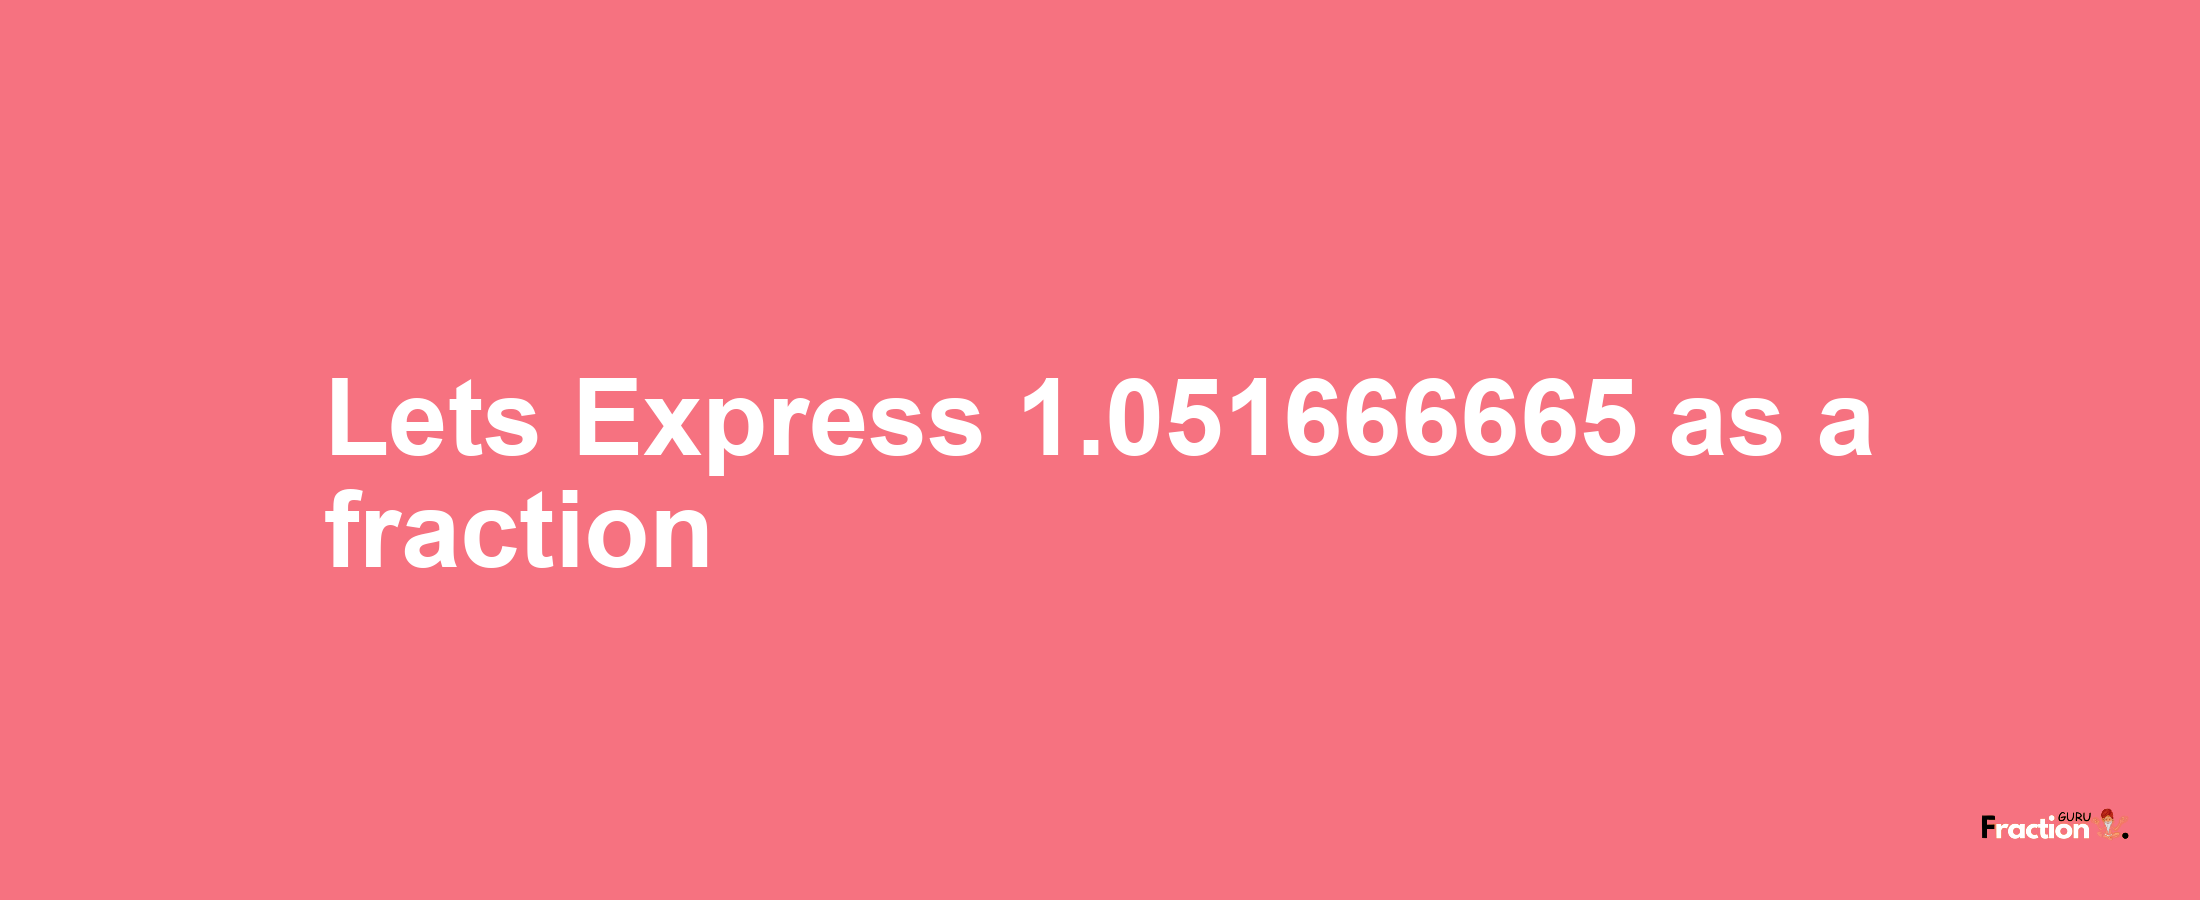 Lets Express 1.051666665 as afraction